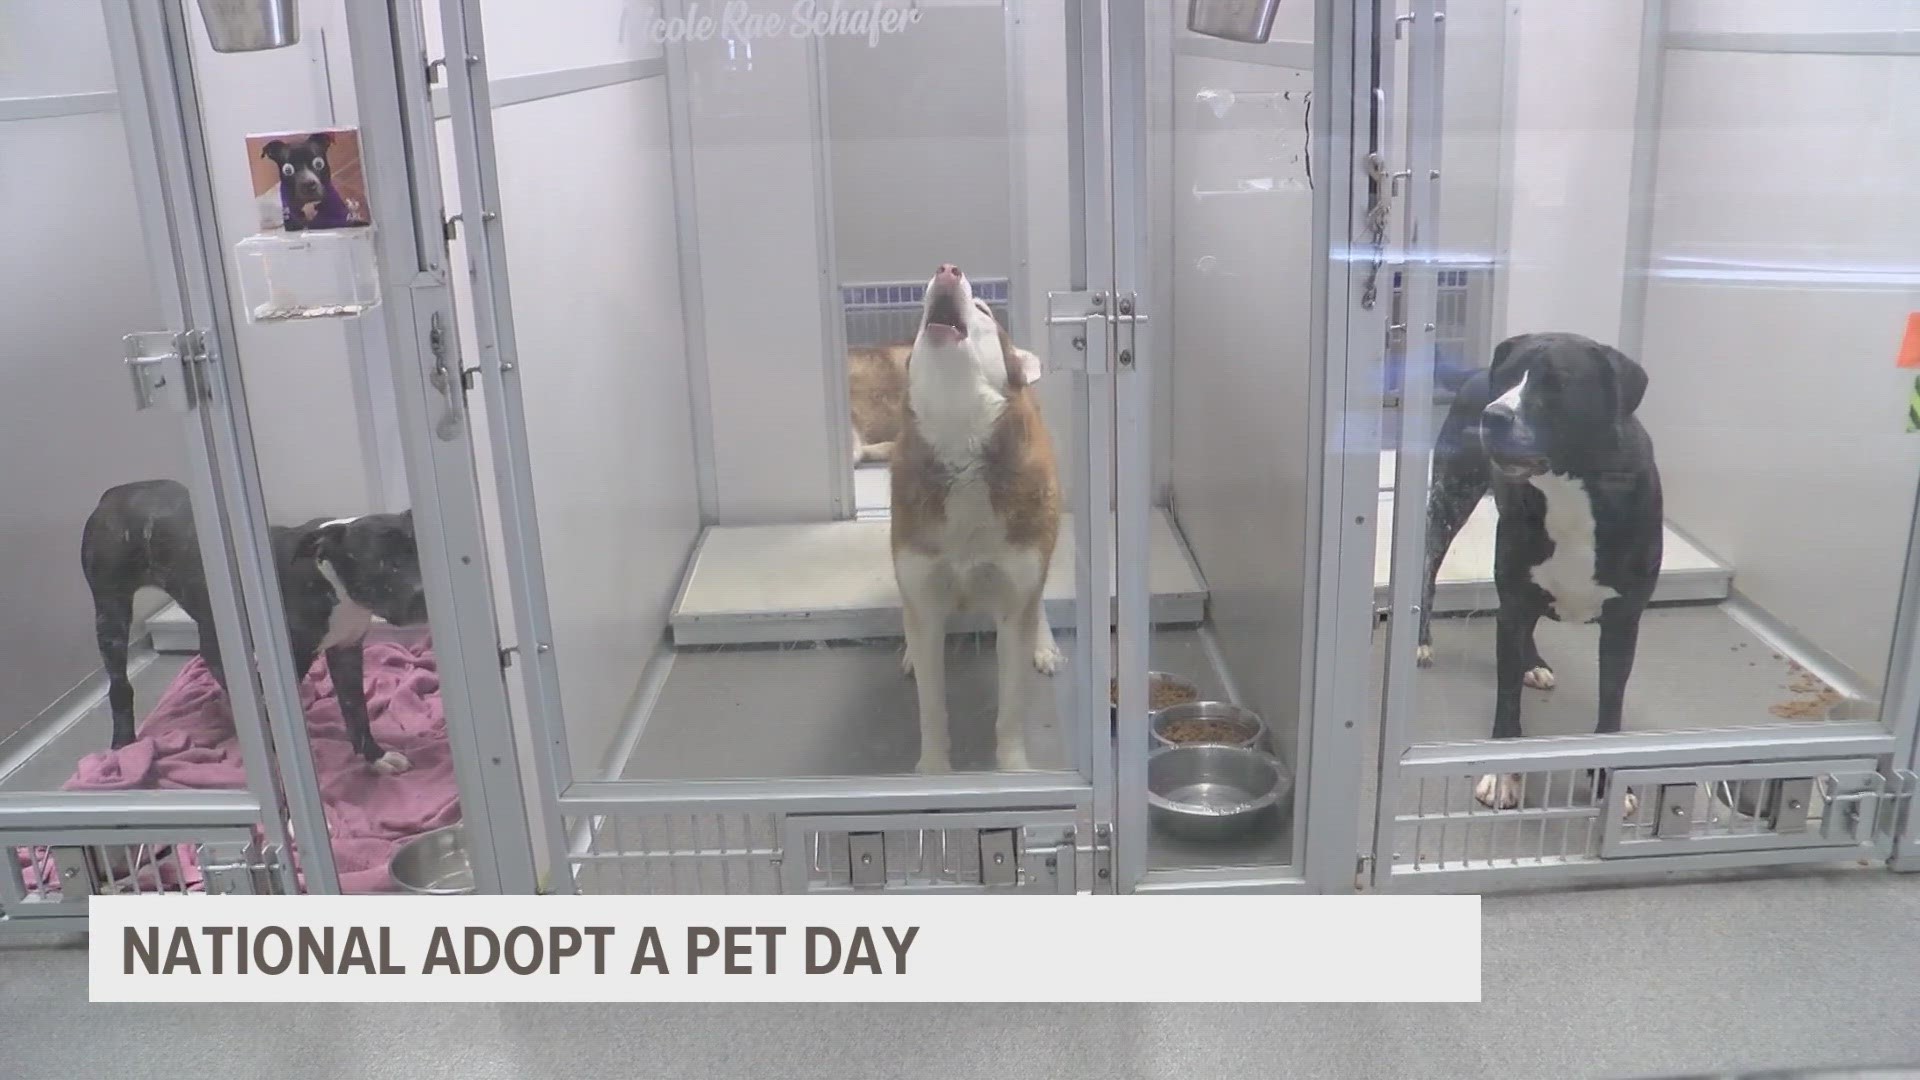 Local 5 stopped by the Animal Rescue League of Iowa to see some of the furry friends looking for a new home.